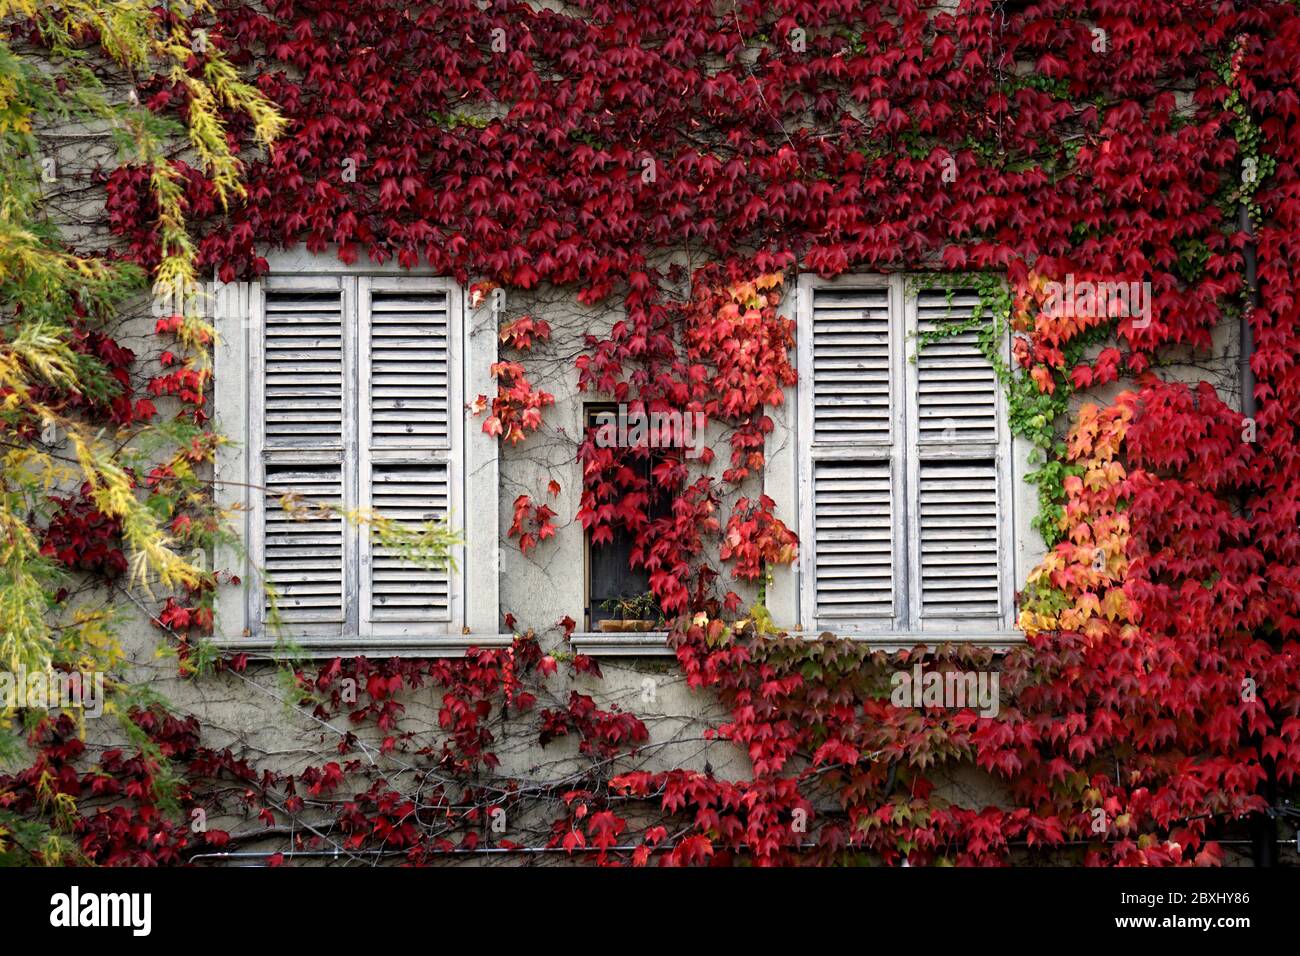 Mediterranean house facade with closed window shutters surrounded by red common ivy in Bergamo, Italy. Stock Photo